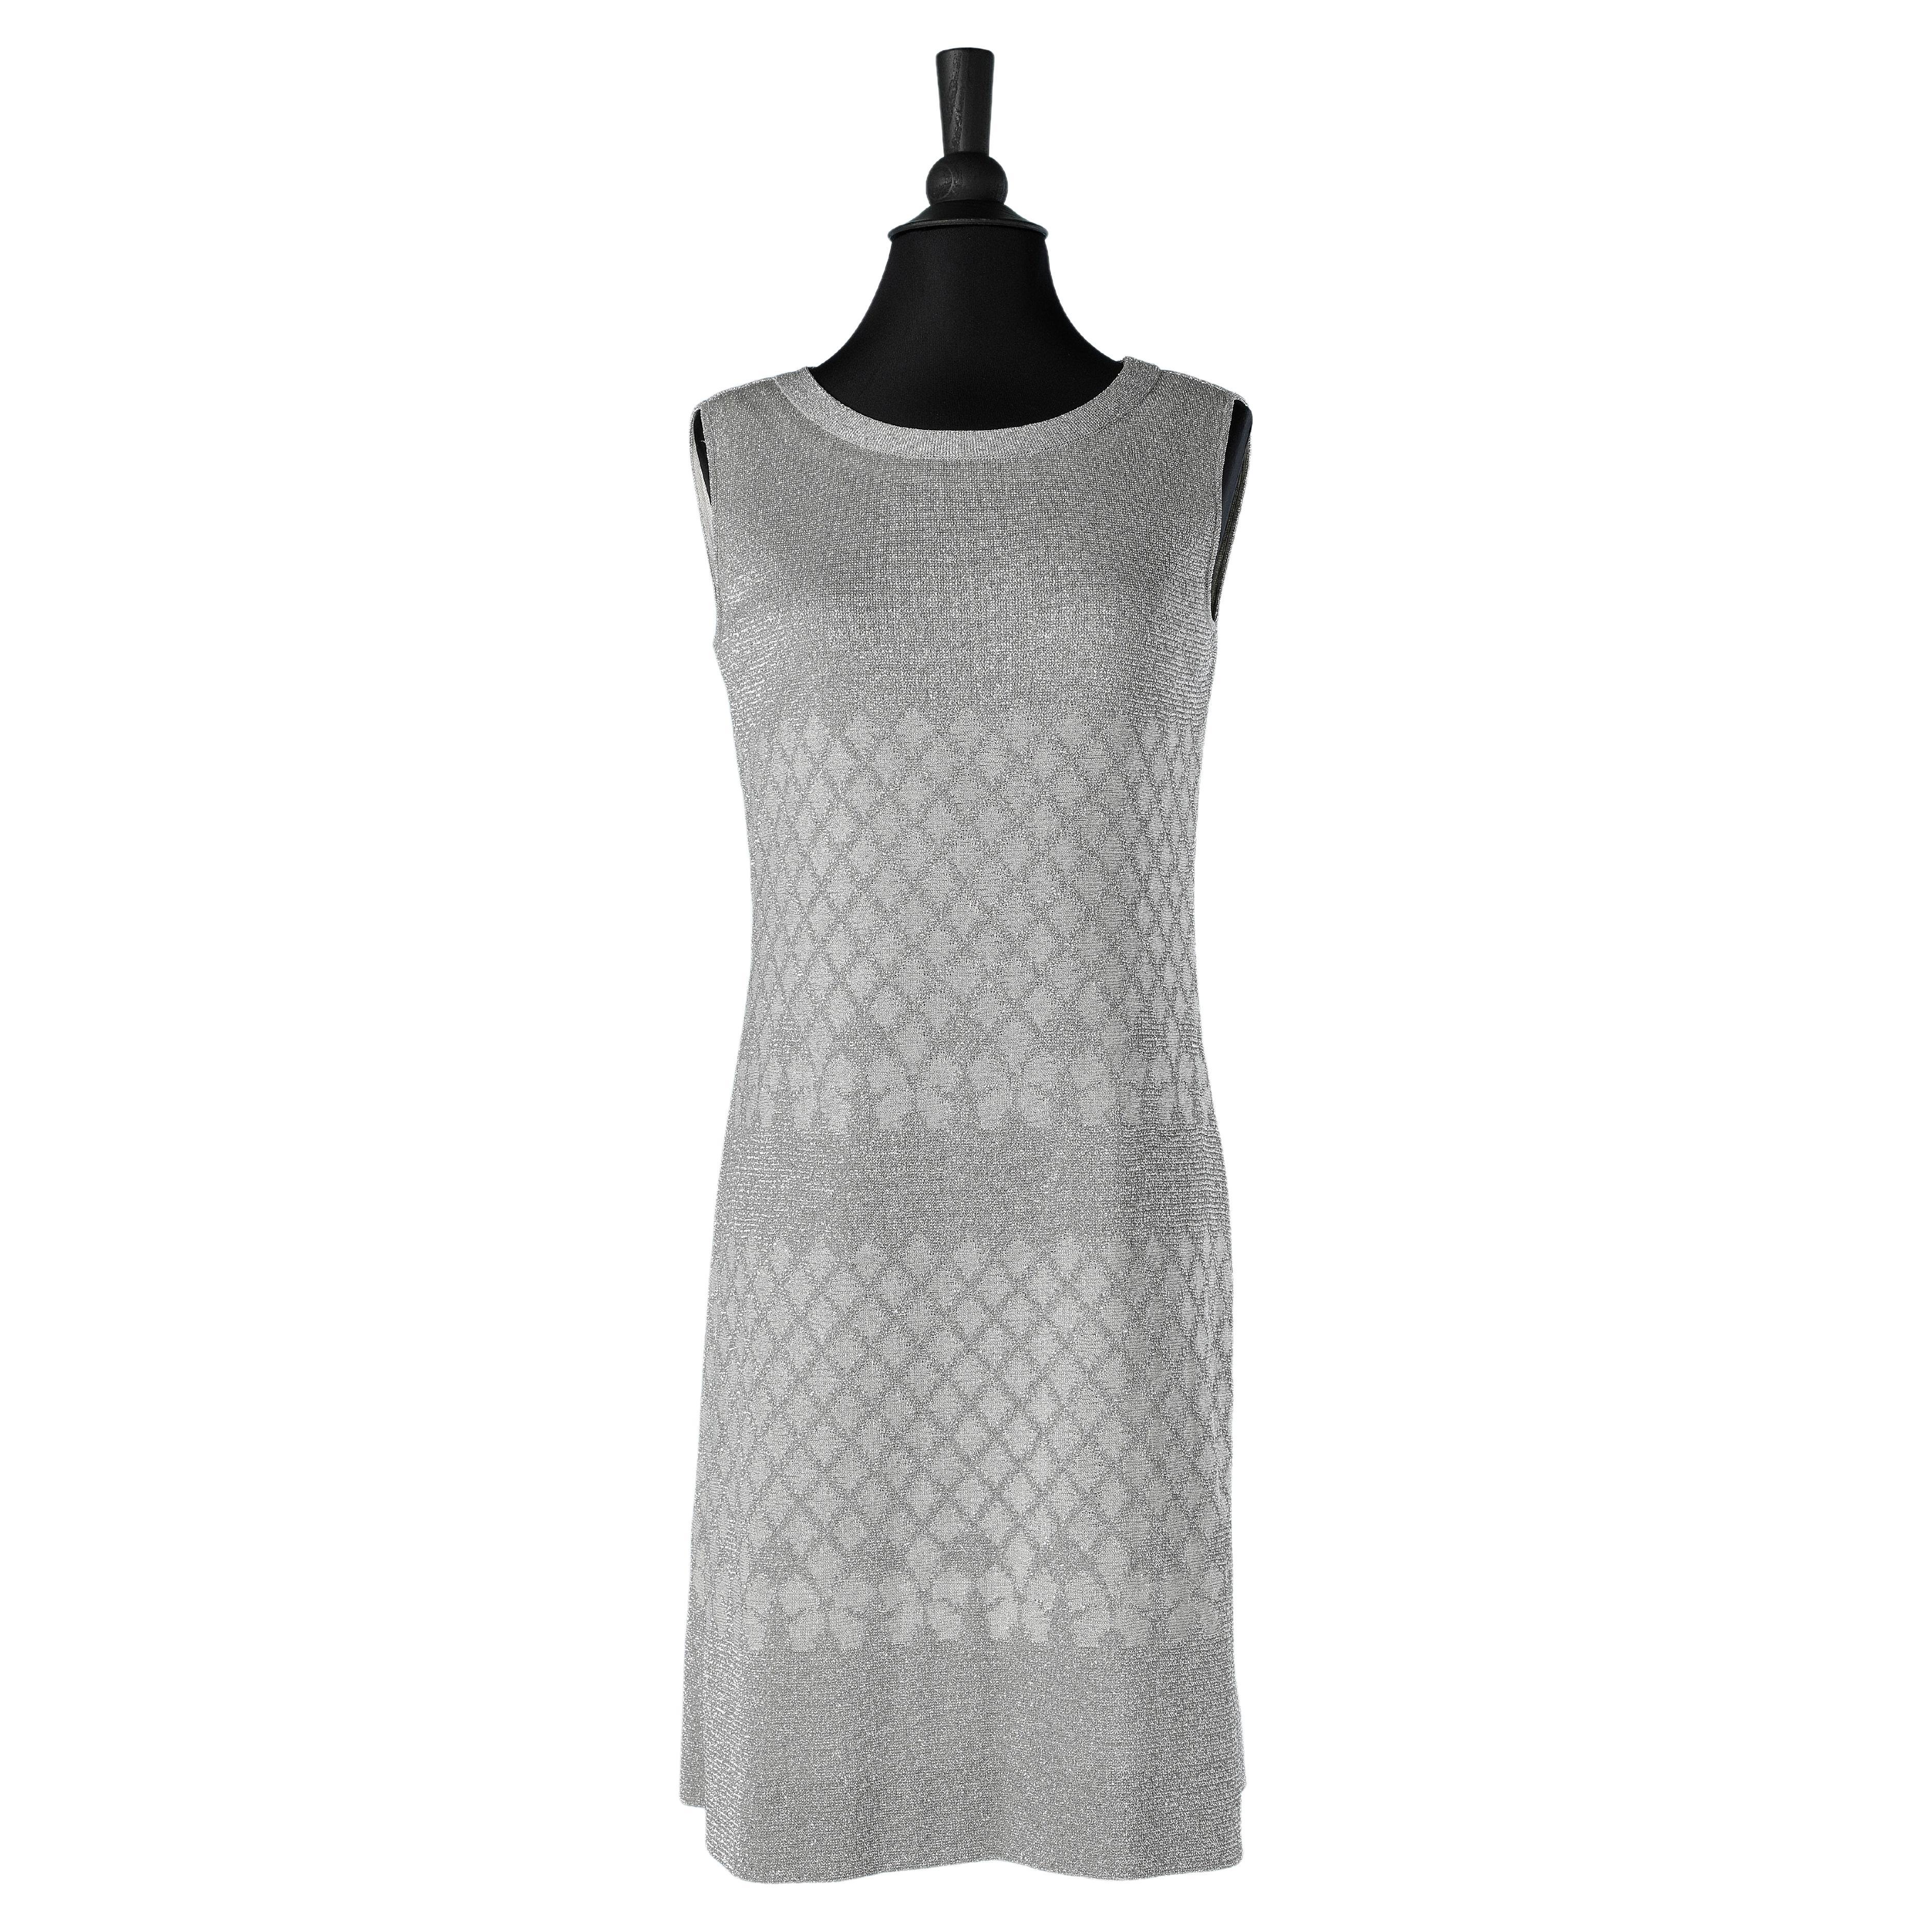 Sleeveless cocktail dress in silver lurex knit Pierre Balmain Les Tricots  For Sale